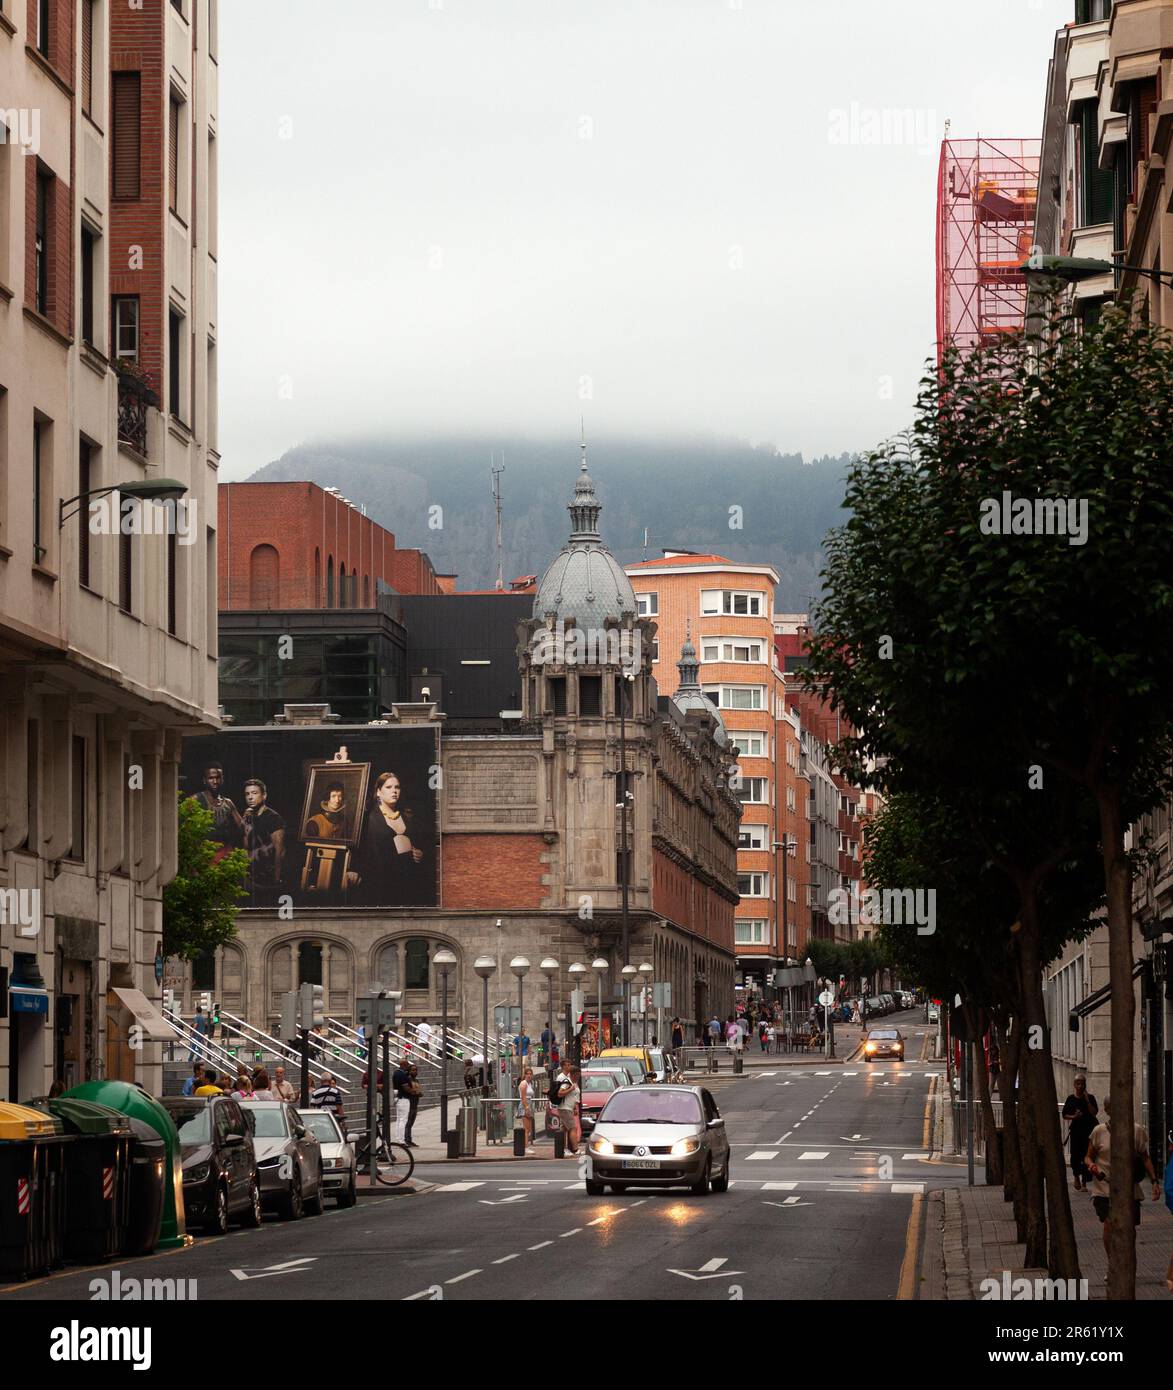 Bilbao, Spain - August 03, 2022: View of the old town of Bilbao on a rainy day, the Azkuna Zentroa on background Stock Photo